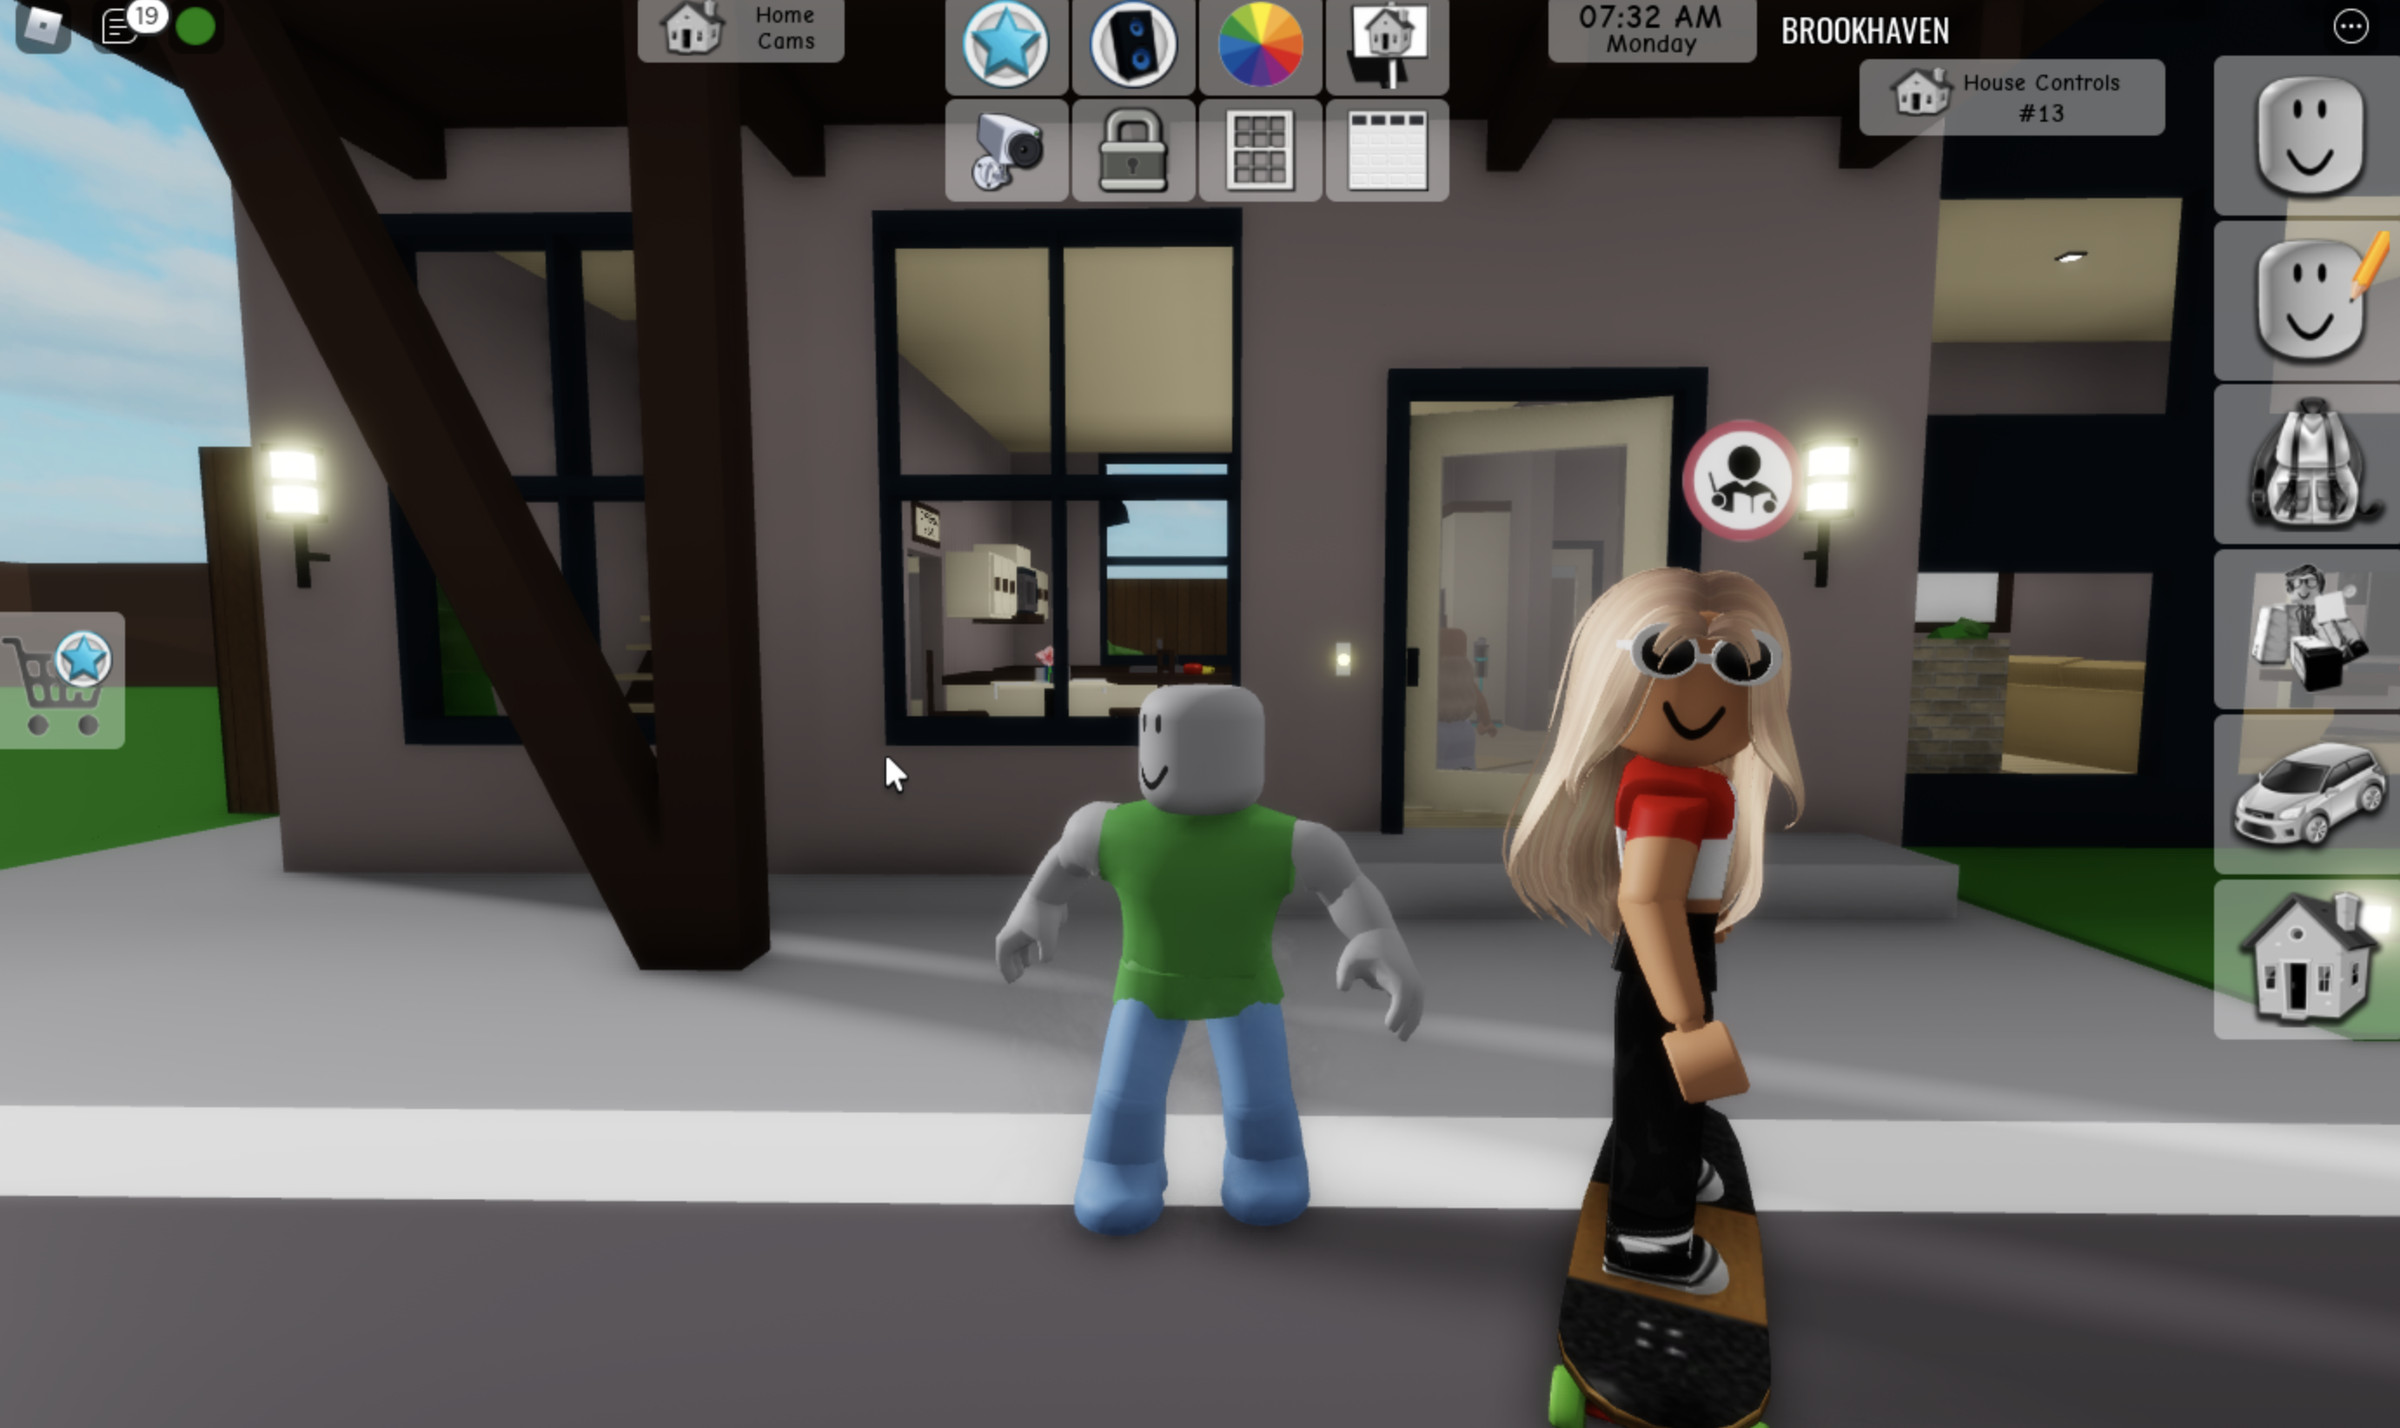 Me in front of my new house in Brookhaven, a popular Roblox game. I have no idea who the cool skateboard person is. They photobombed me.